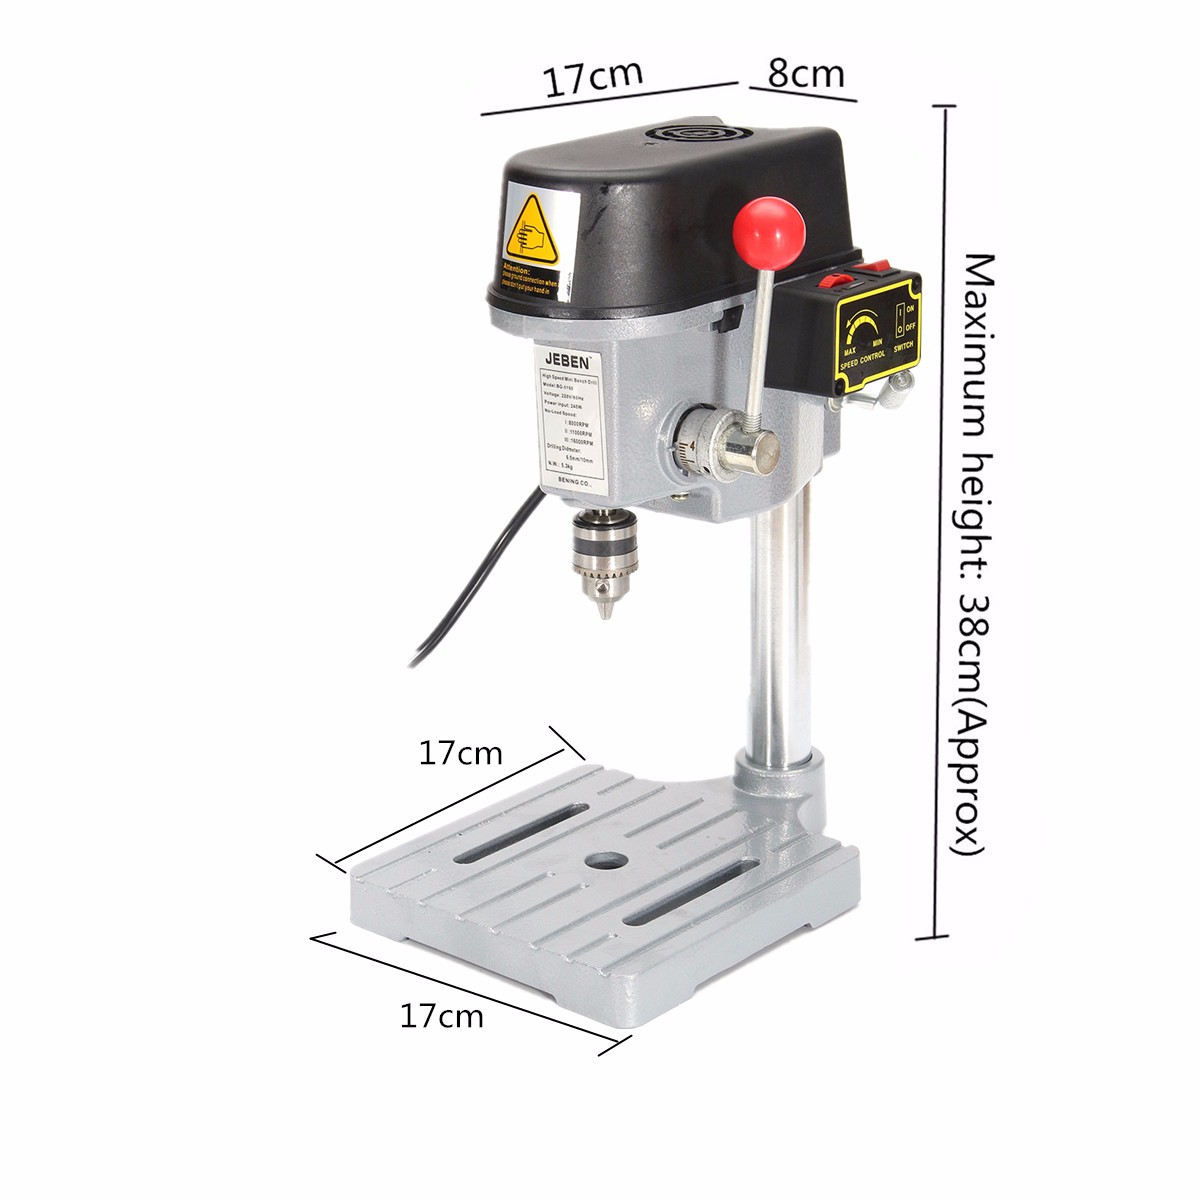 220V Drill Press Mini Drilling Machine 240W for Bench Machine Table Bit Drilling Chuck 0.6-6.5mm Wood Metal Electrical Tools